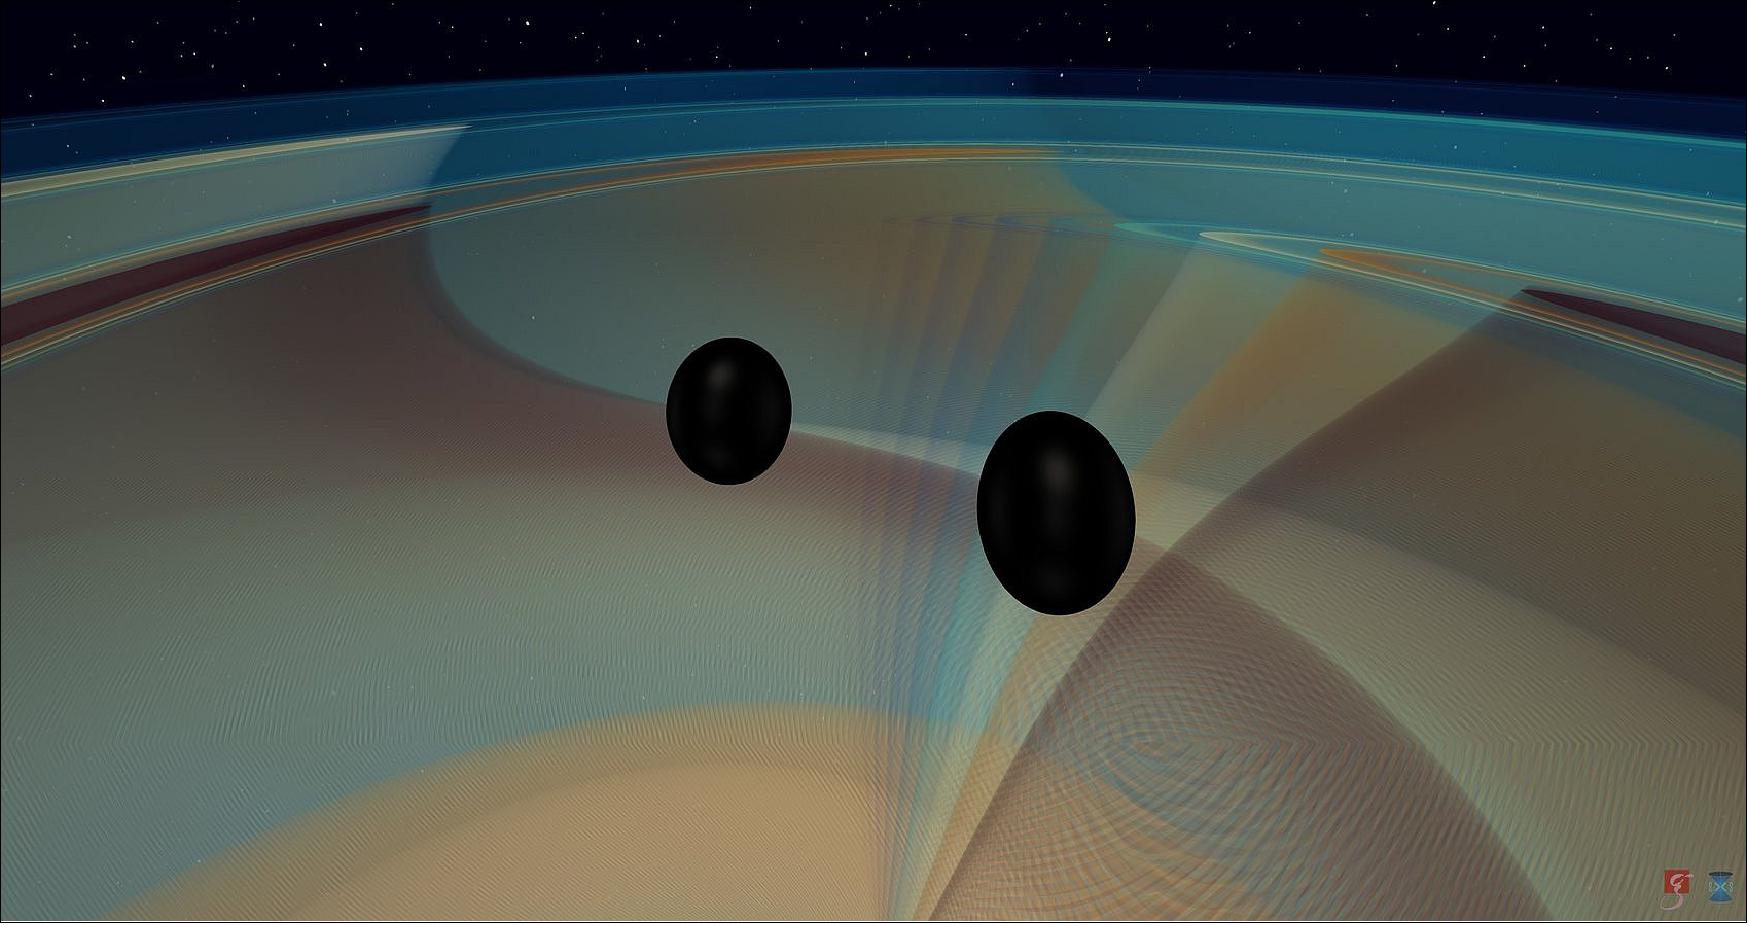 Figure 7: Numerical simulation of two black holes that inspiral and merge, emitting gravitational waves. The black holes have large and nearly equal masses, with one only 3% more massive than the other. The simulated gravitational wave signal is consistent with the observation made by the LIGO and Virgo gravitational wave detectors on May 21st, 2019 (GW190521), [image credit: N. Fischer, H. Pfeiffer, A. Buonanno (Max Planck Institute for Gravitational Physics), Simulating eXtreme Spacetimes (SXS) Collaboration]